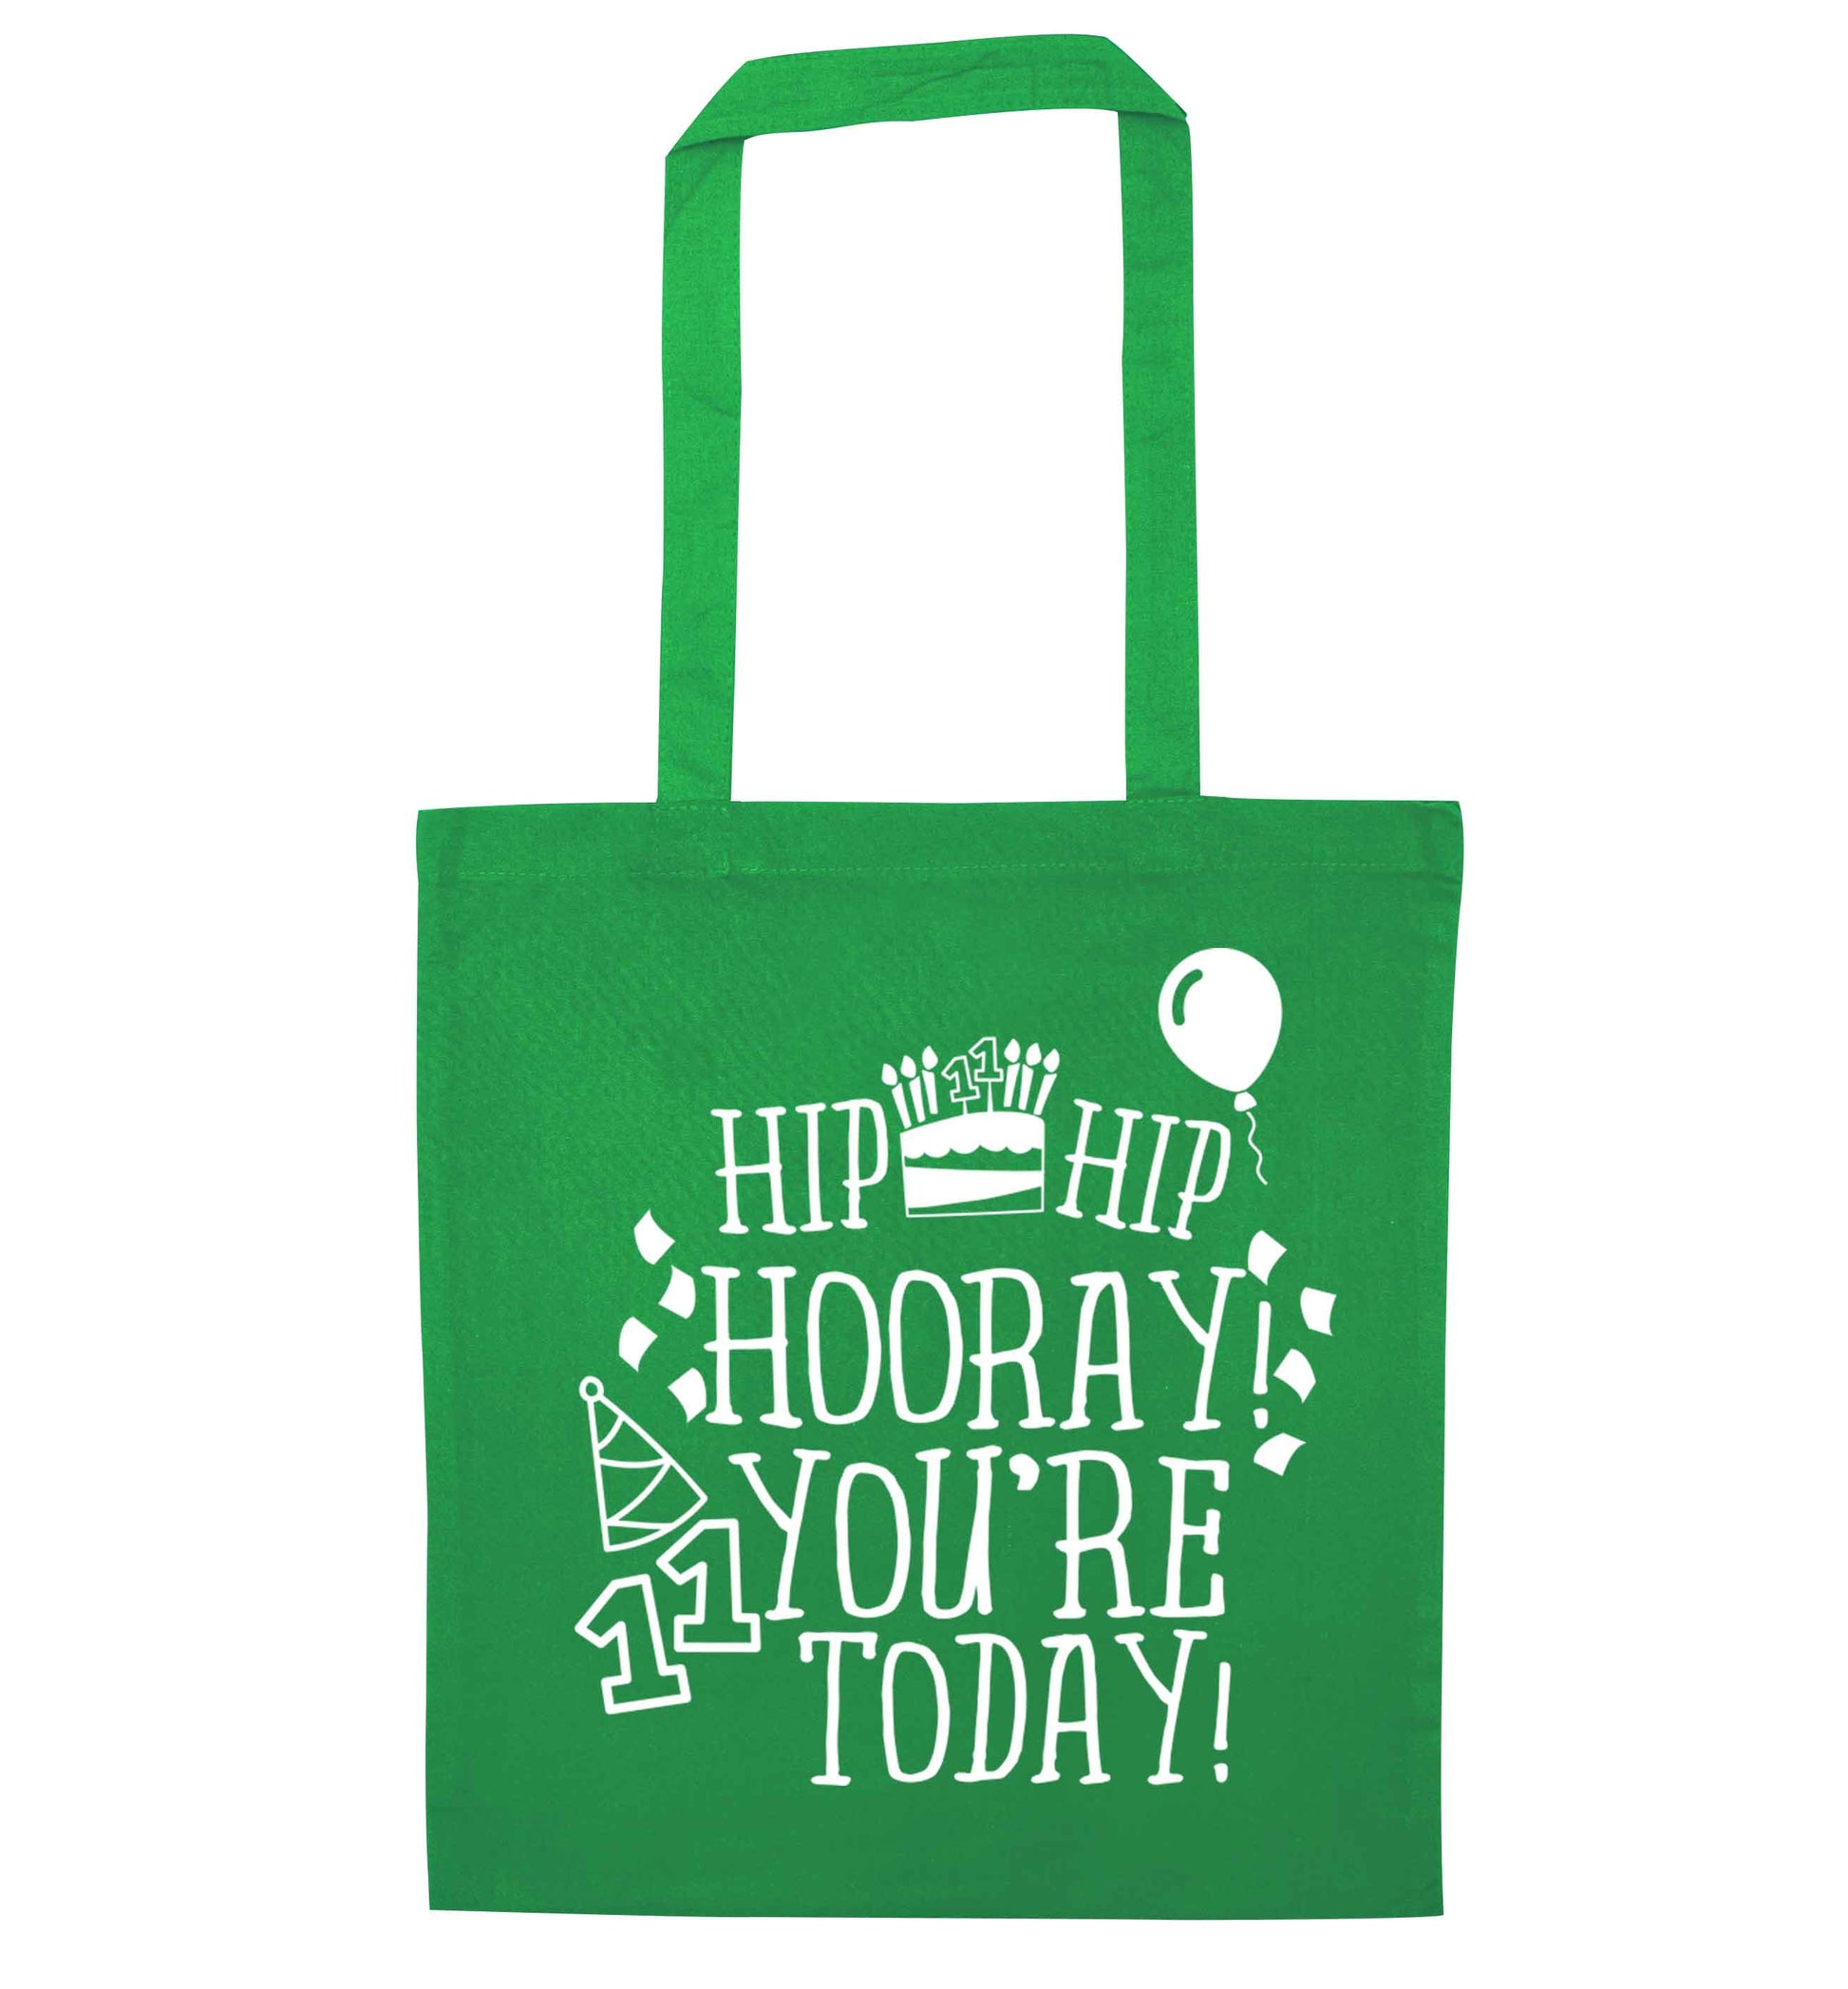 Hip hip hooray I you're eleven today! green tote bag